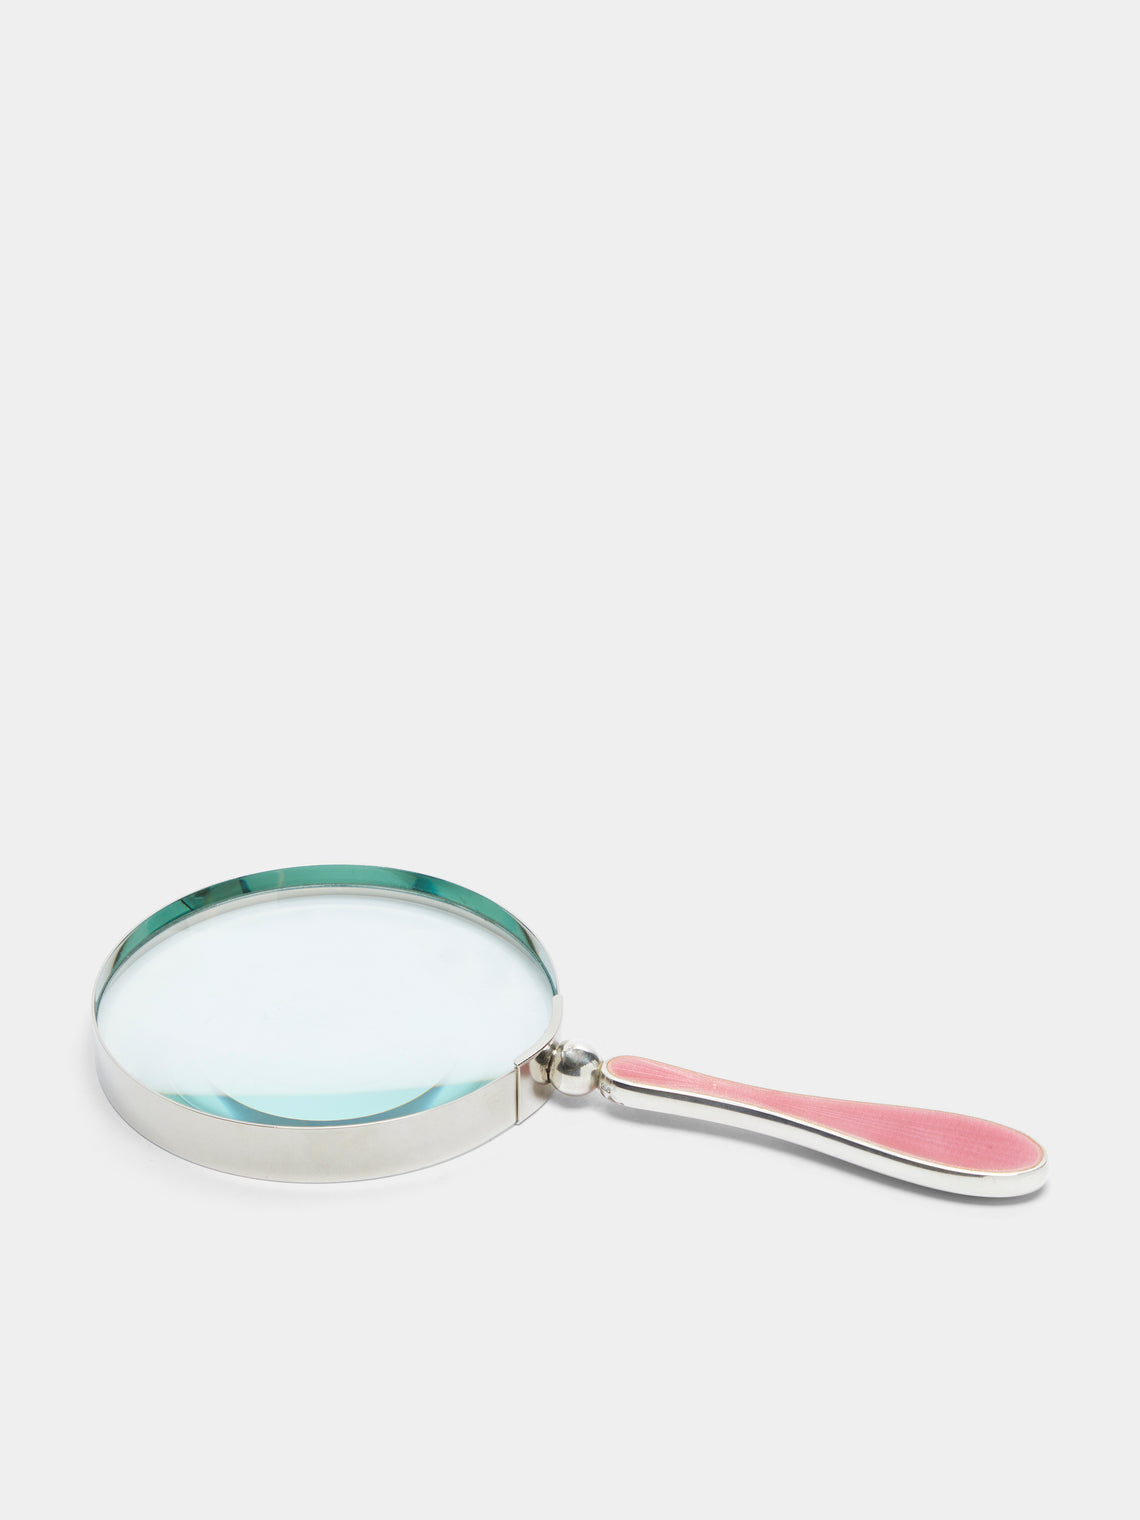 Antique and Vintage - 1920s Sterling Silver Enamel-Mounted Magnifying Glass - Pink - ABASK